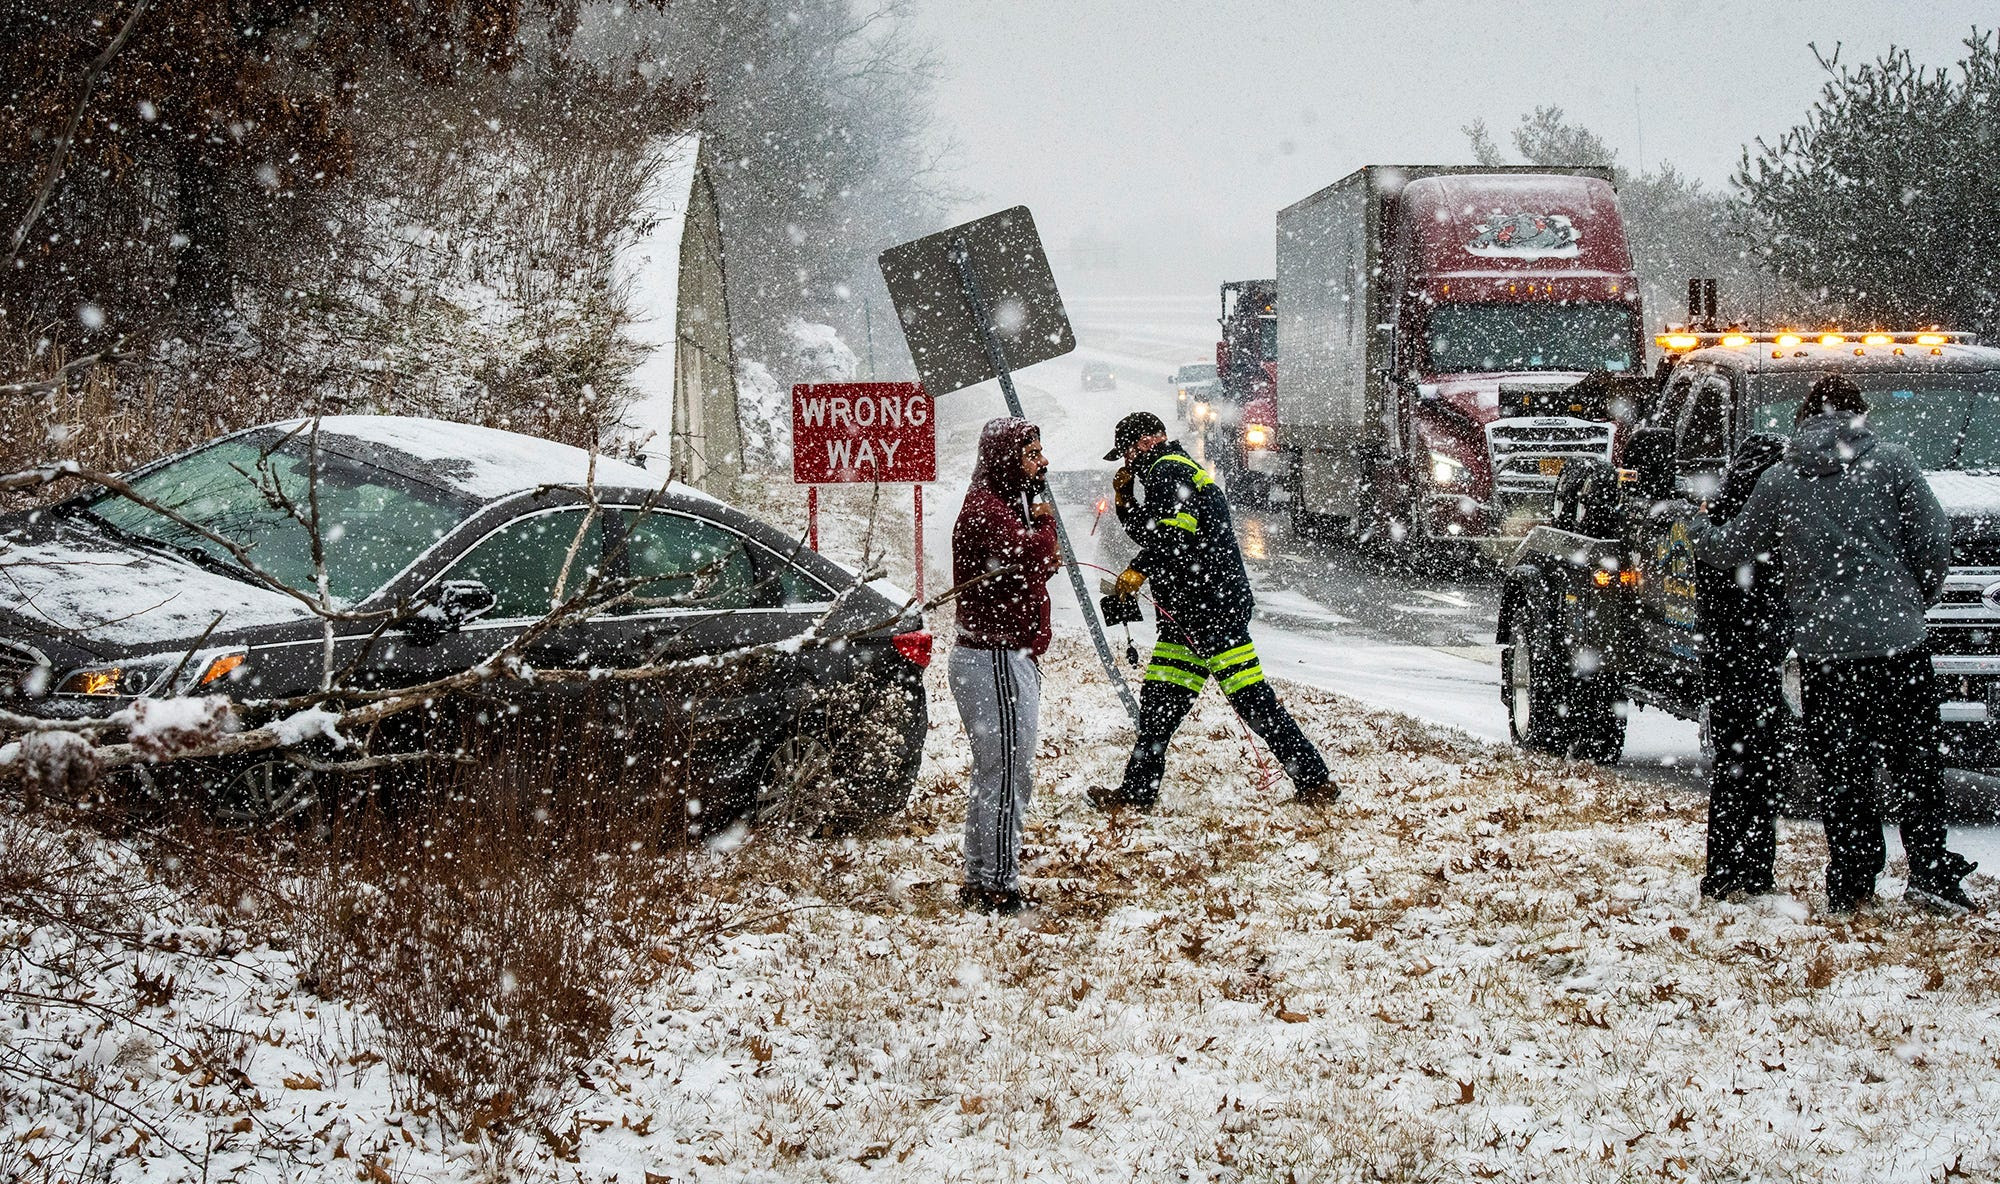 150M people under winter advisories as storm stretches across 25 states